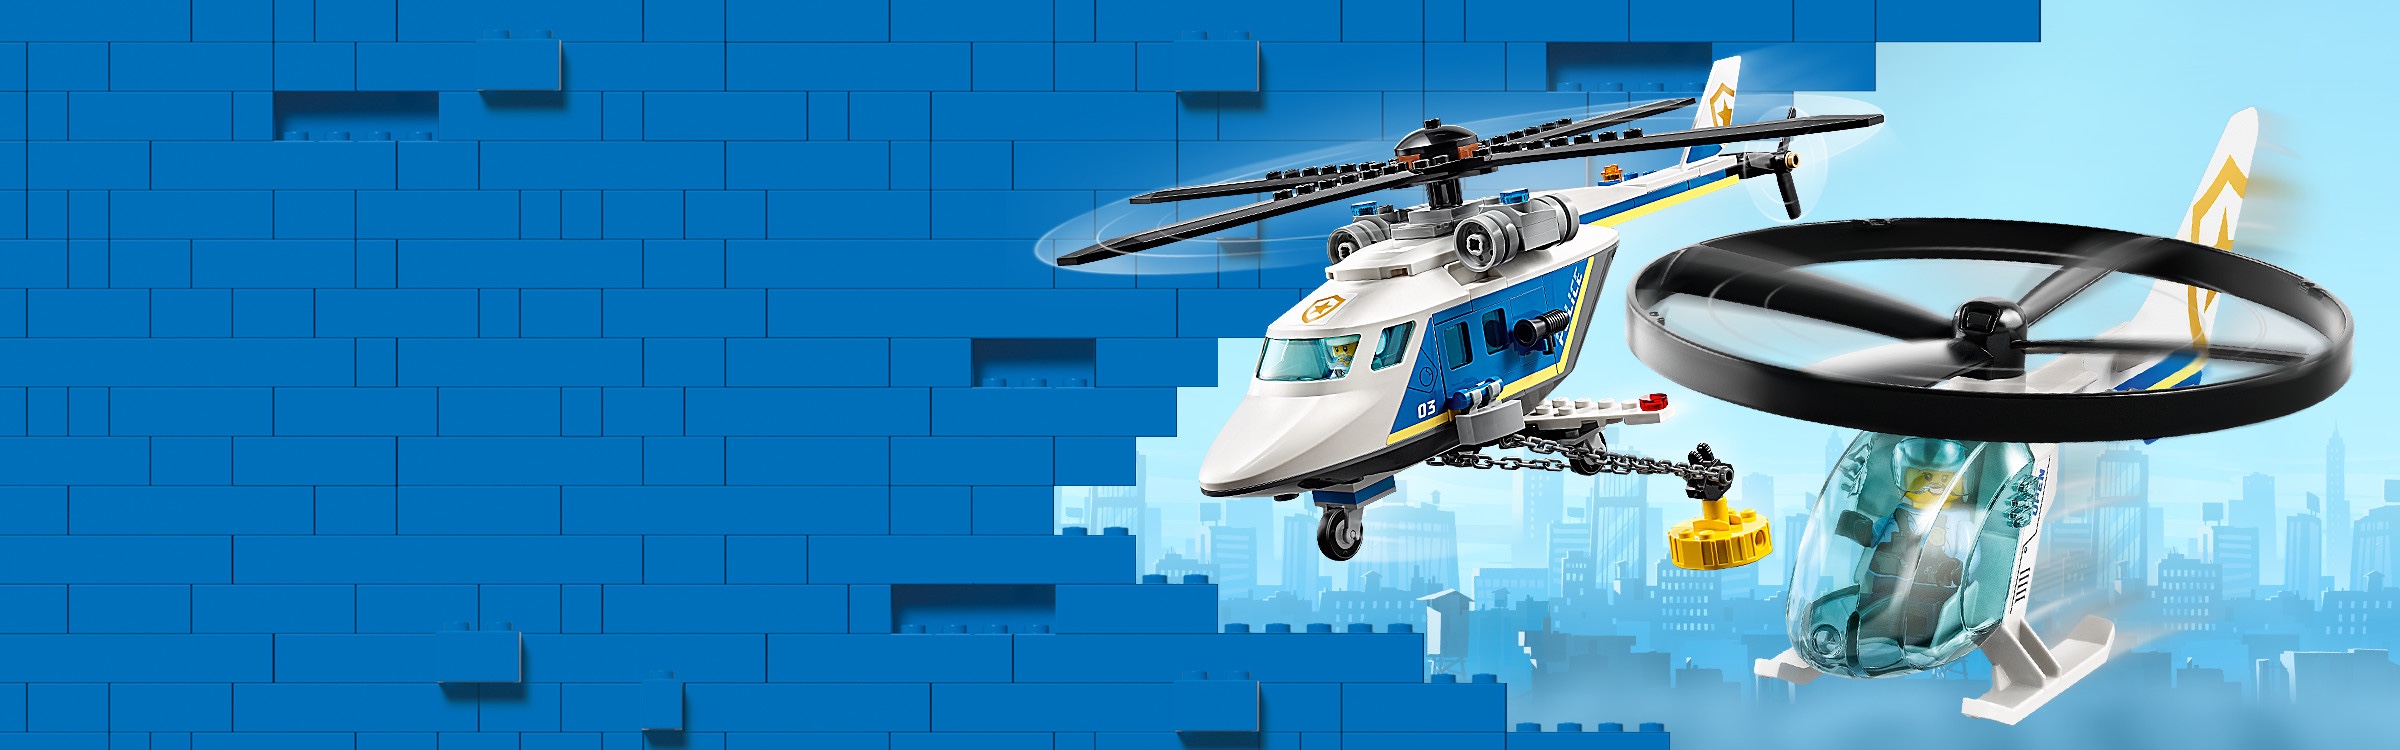 flying lego helicopter